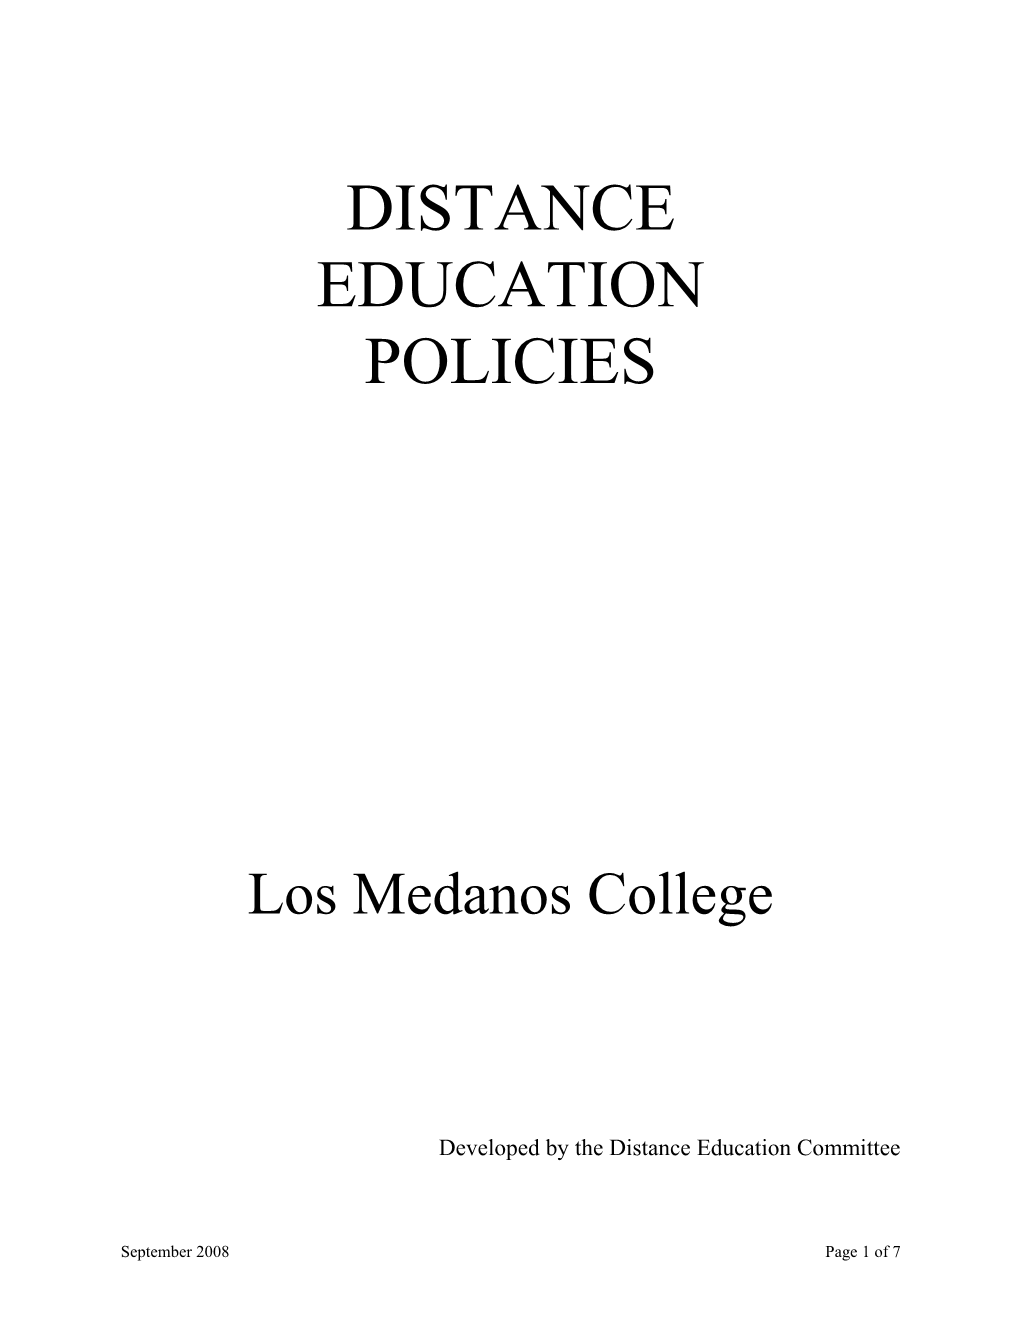 Developed by the Distance Education Committee